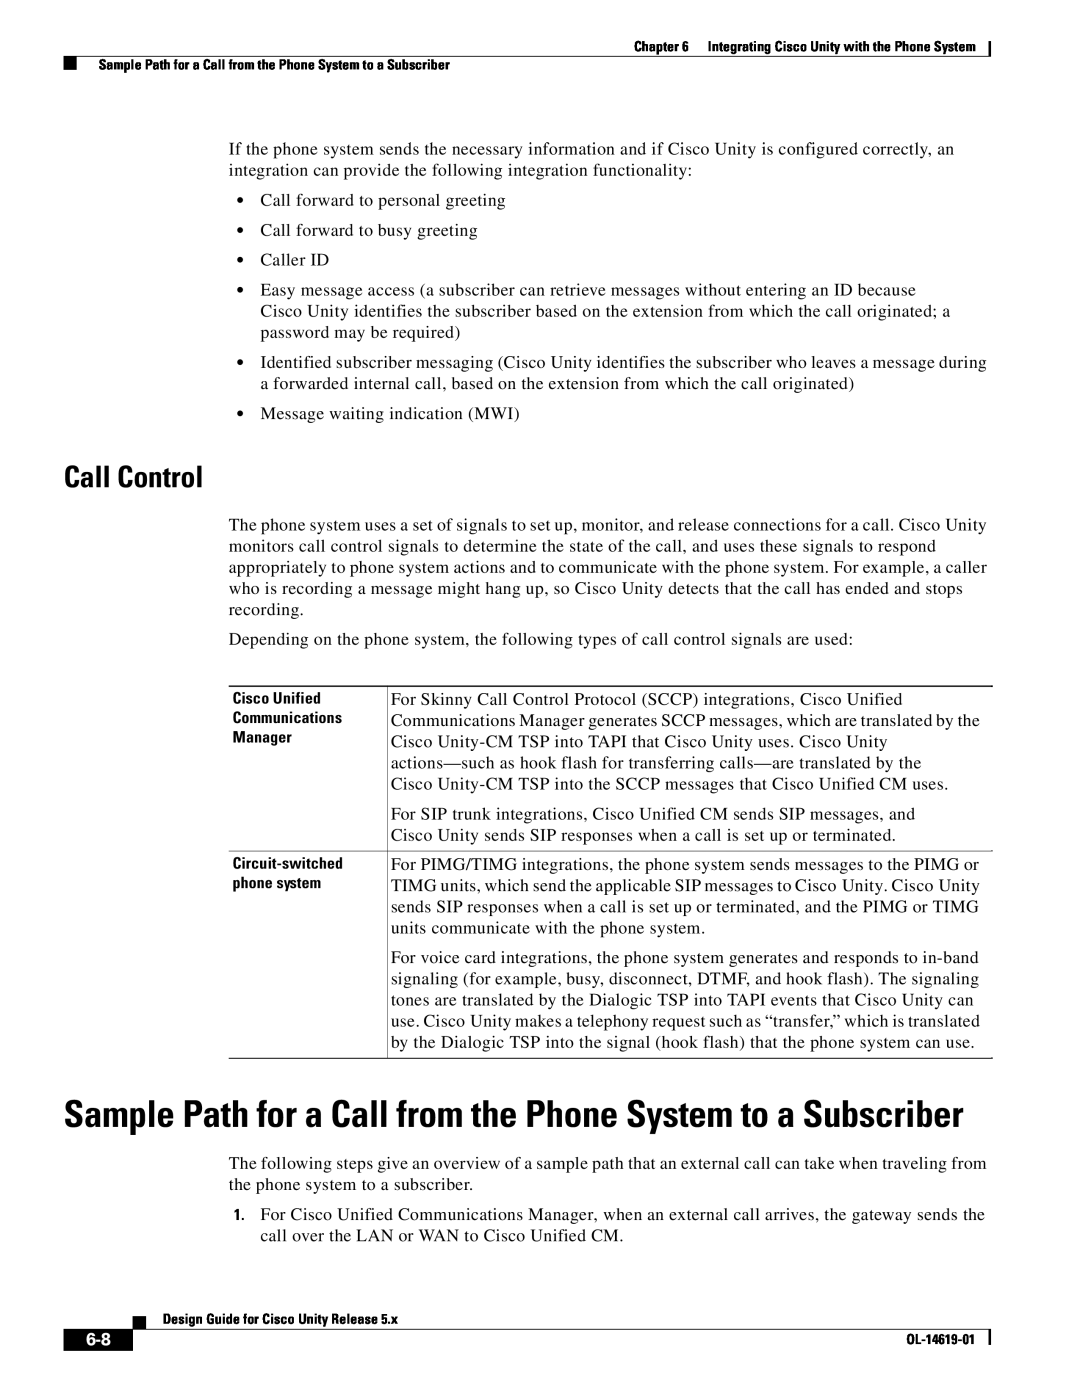 Cisco Systems OL-14619-01 manual Sample Path for a Call from the Phone System to a Subscriber, Call Control 